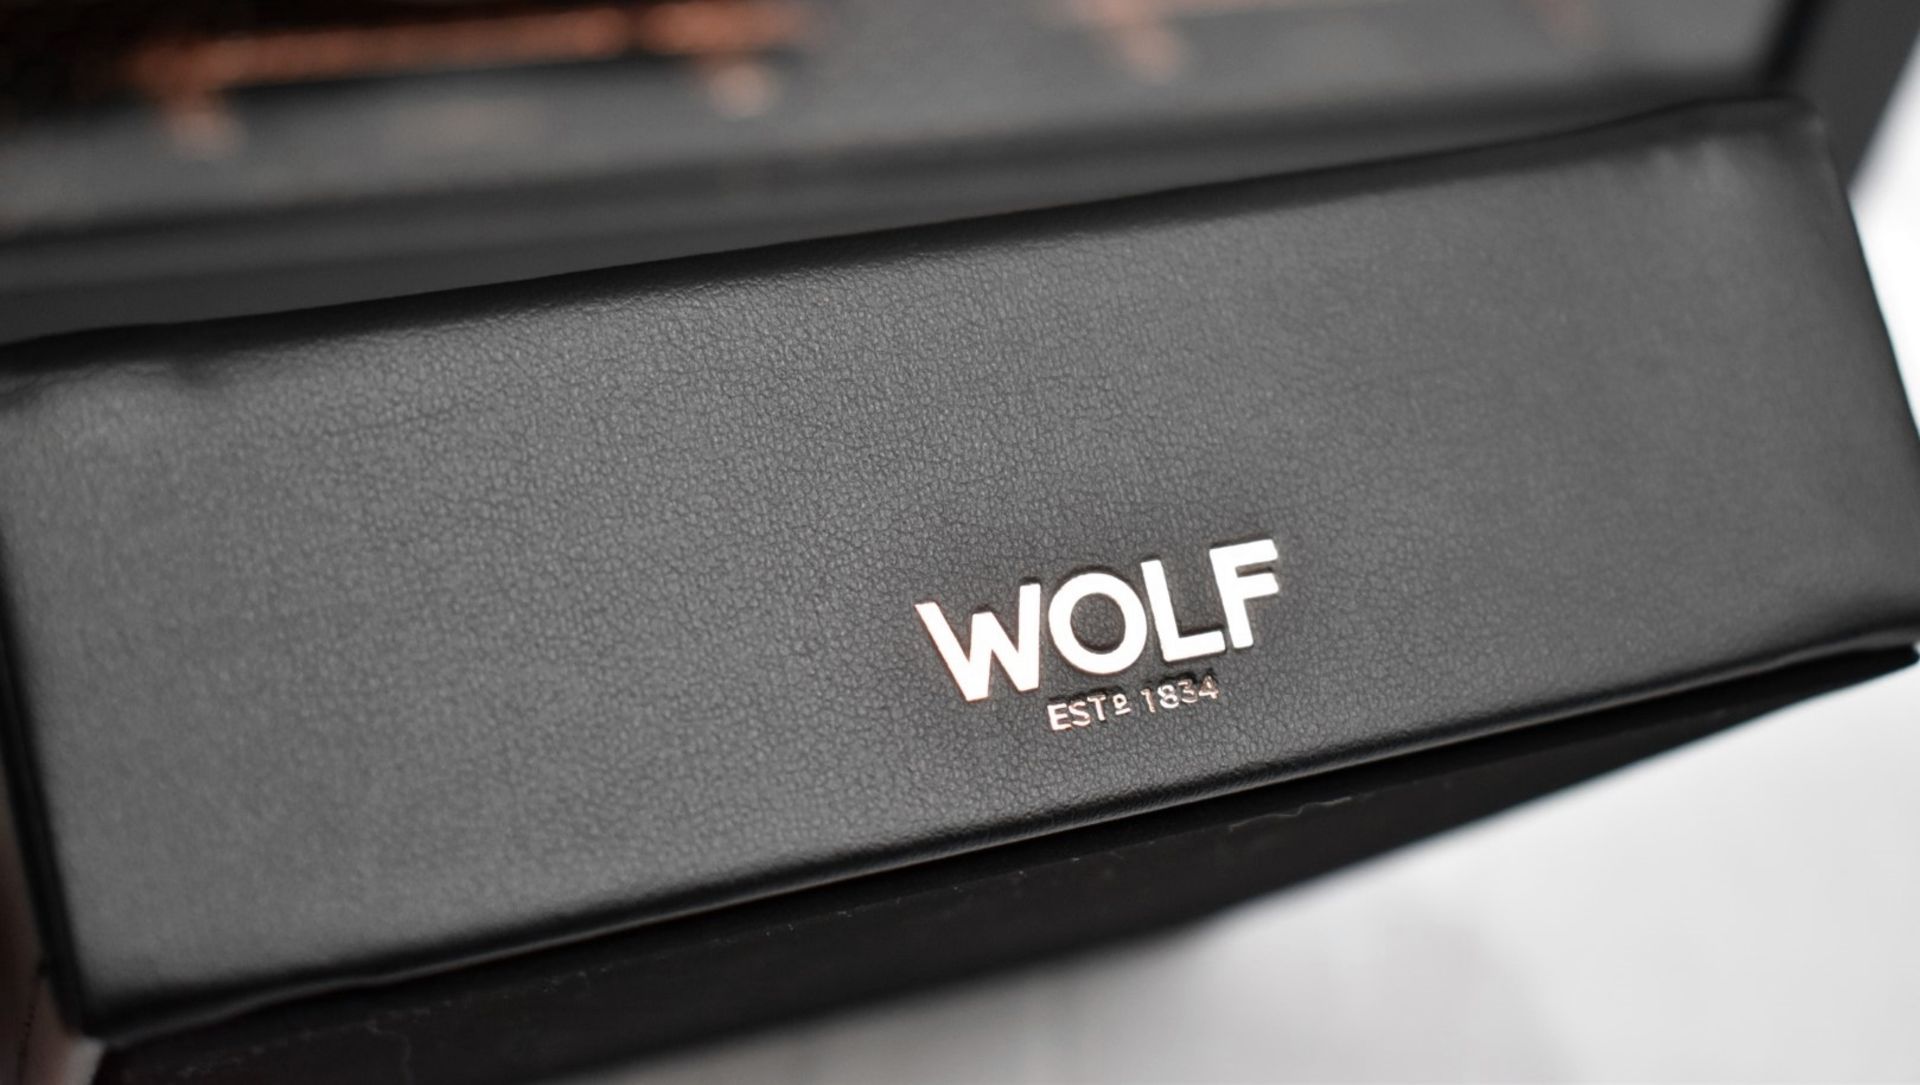 1 x WOLF 'Axis' Luxury Triple Watch Winder With Storage - Original Price £1,809 - Unused Boxed Stock - Image 18 of 32